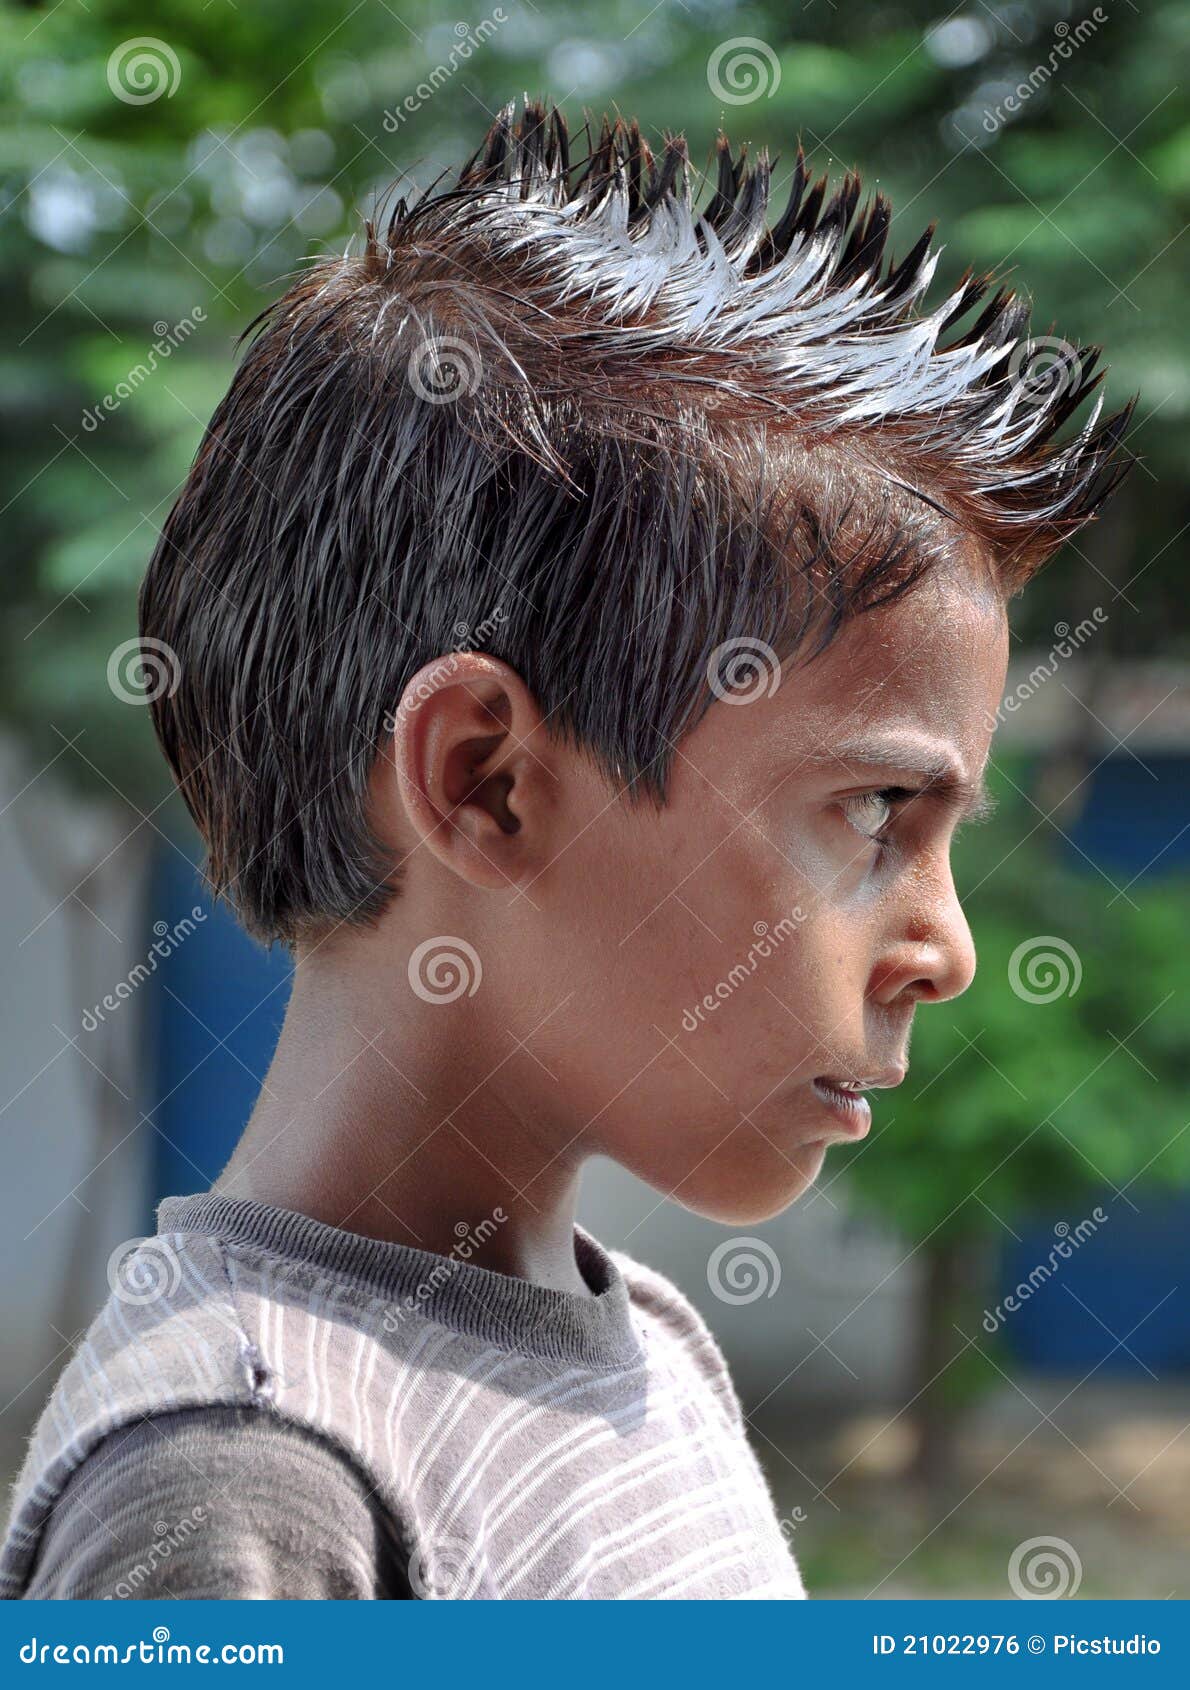 Hair spikes stock photo. Image of pointed, children, expressions ...